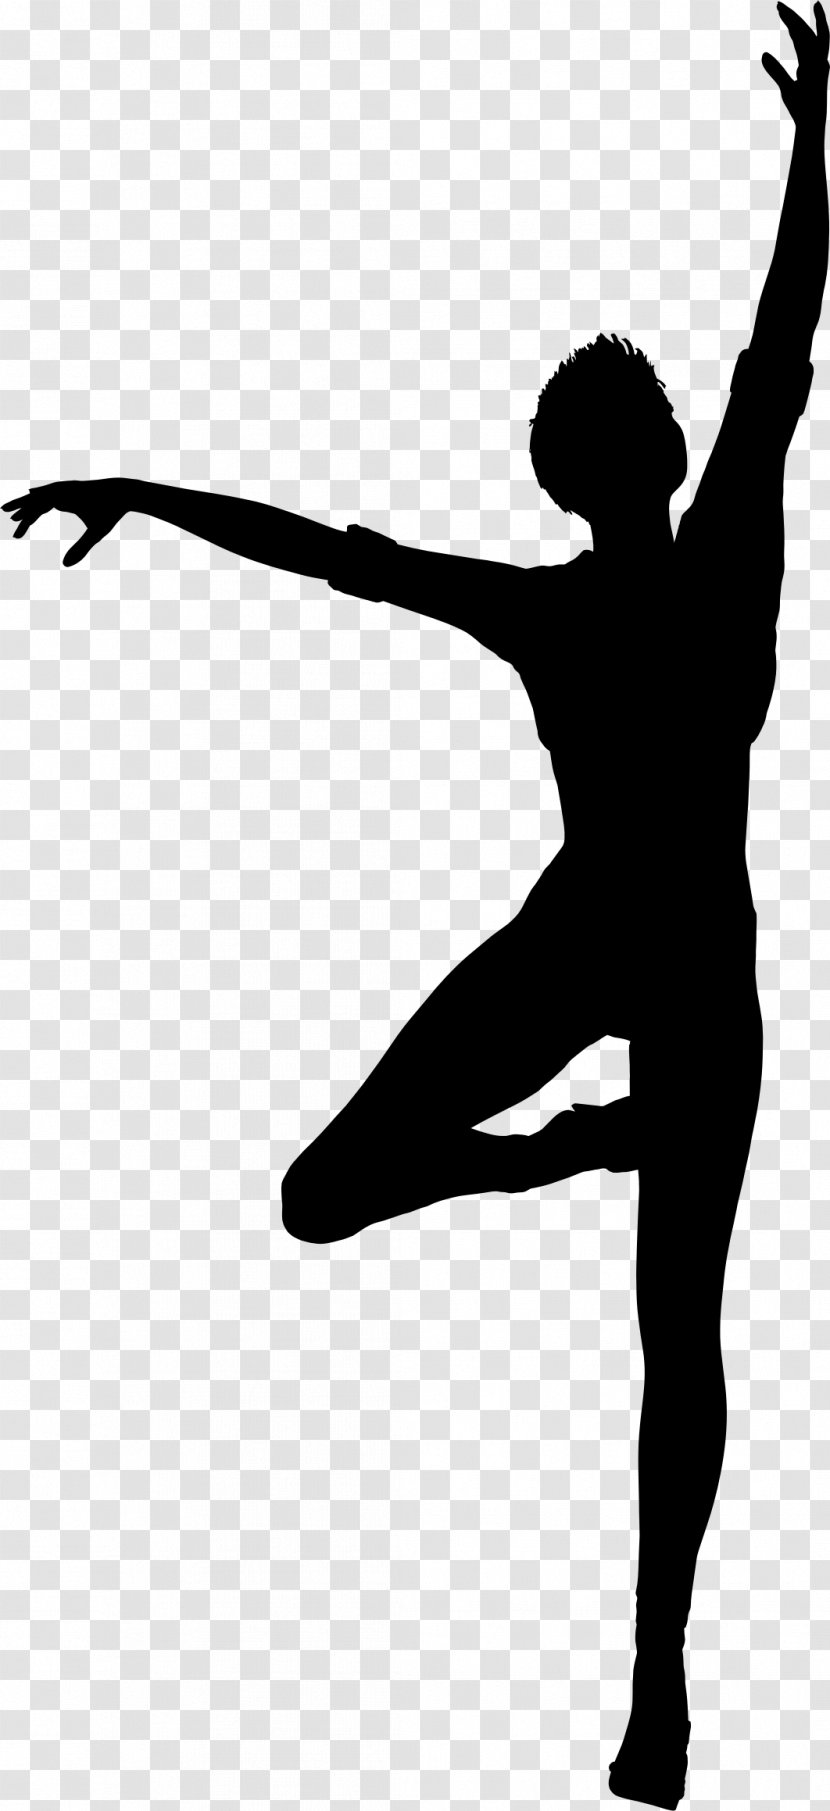 Ballet Dancer Moscow State Academy Of Choreography Silhouette - Frame Transparent PNG